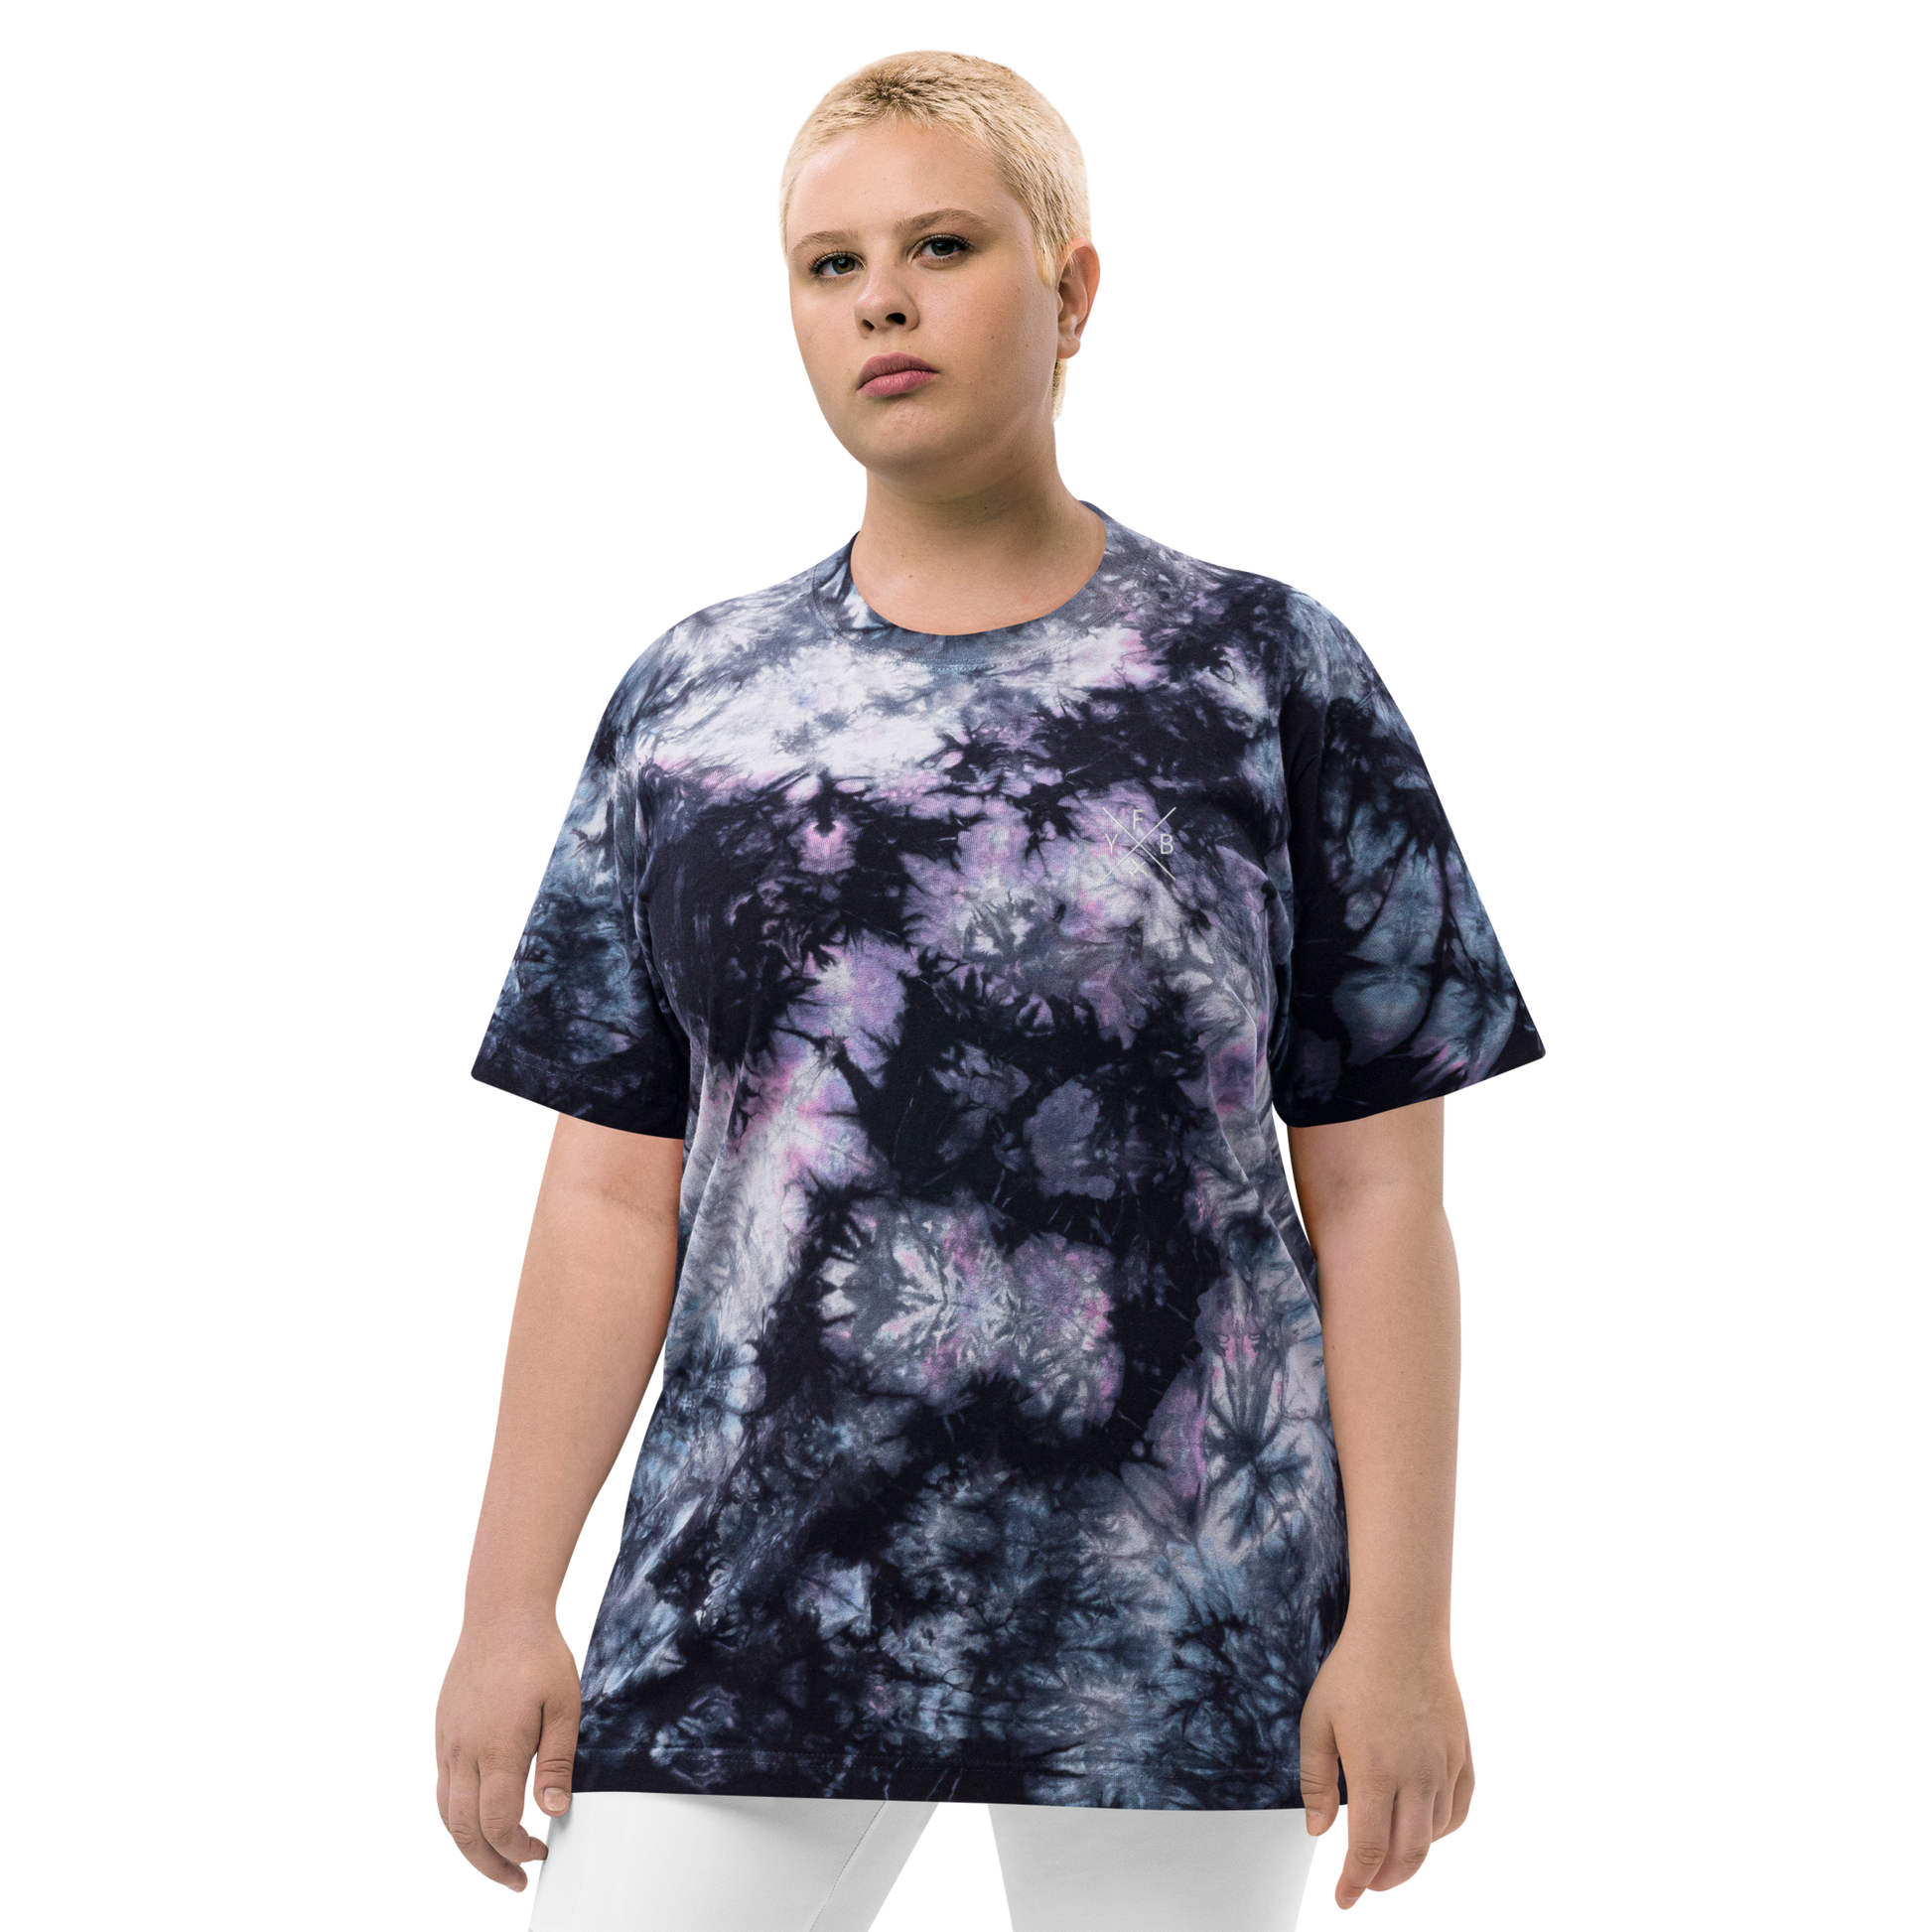 YHM Designs - YFB Iqaluit Oversized Tie-Dye T-Shirt - Crossed-X Design with Airport Code and Vintage Propliner - White Embroidery - Image 05